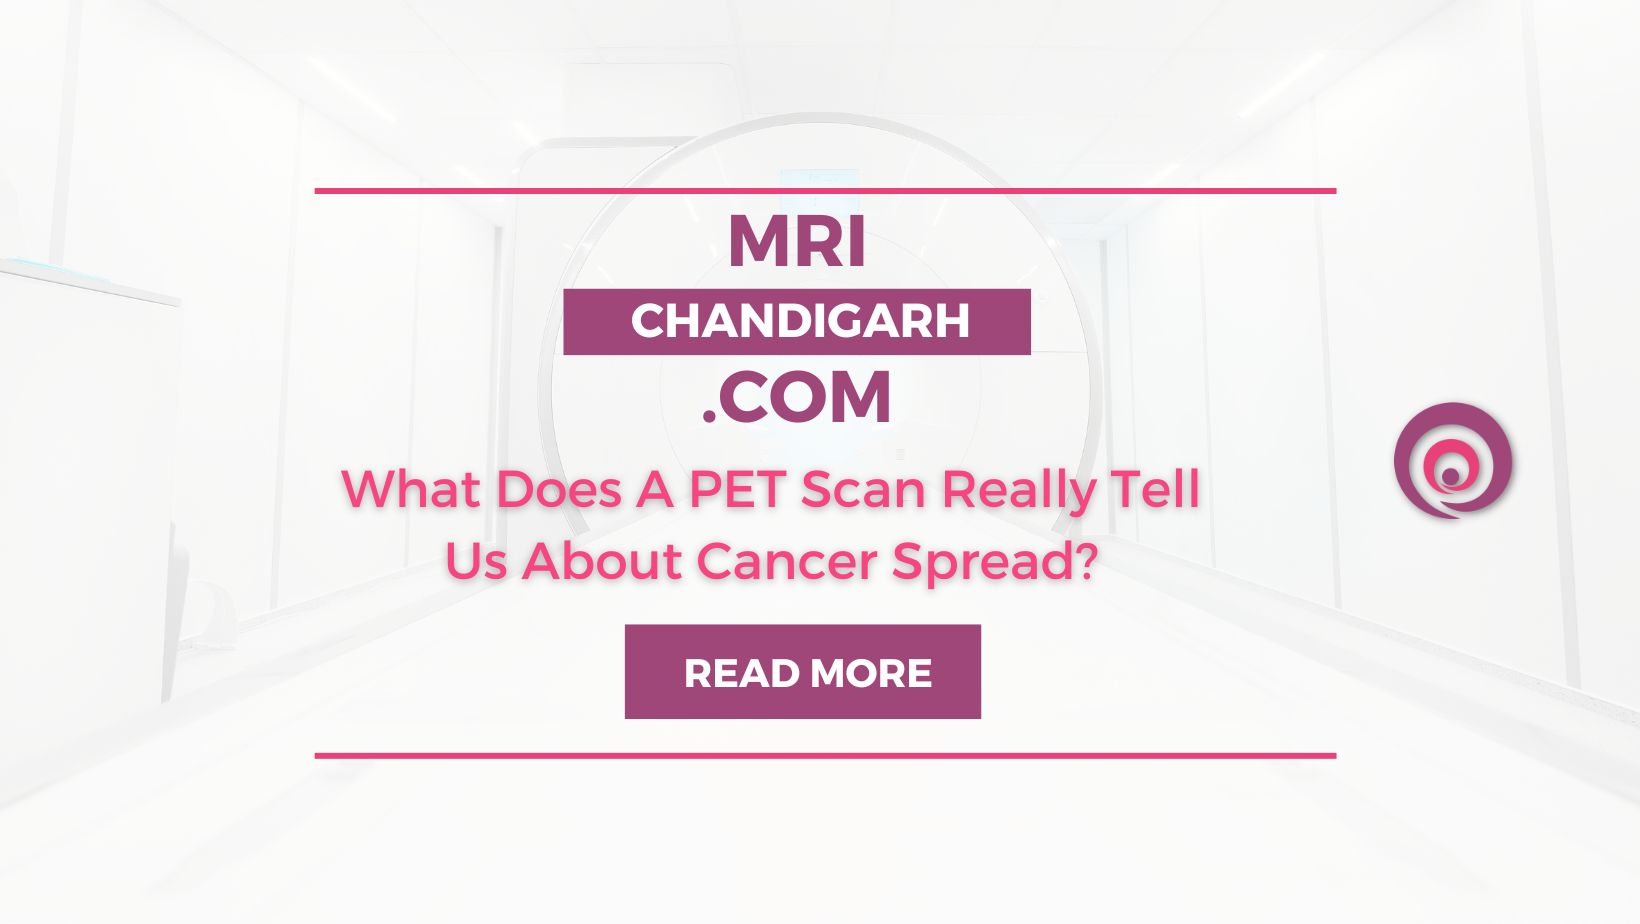 What Does A PET Scan Really Tell Us About Cancer Spread?